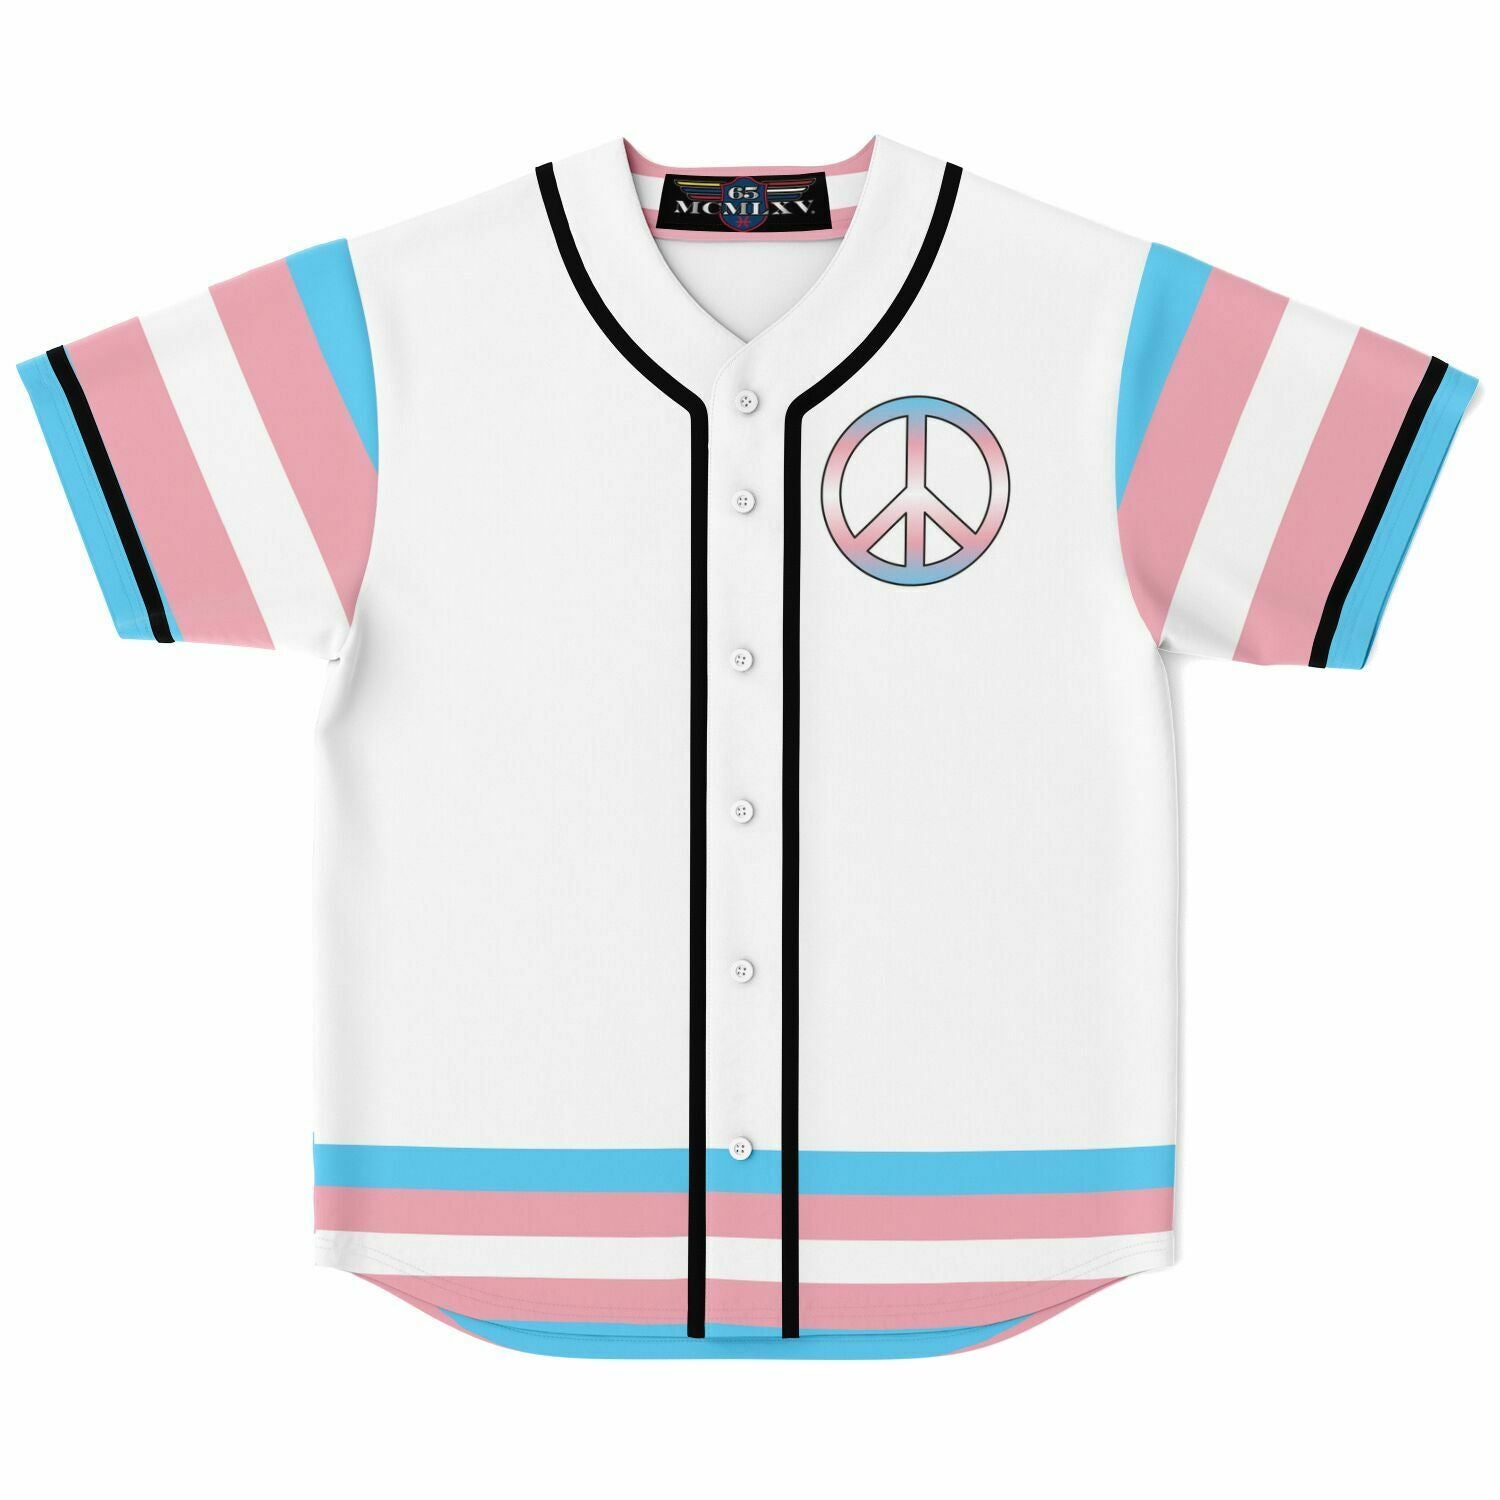 RMNB's newest sweater, a Pride jersey, is available on preorder